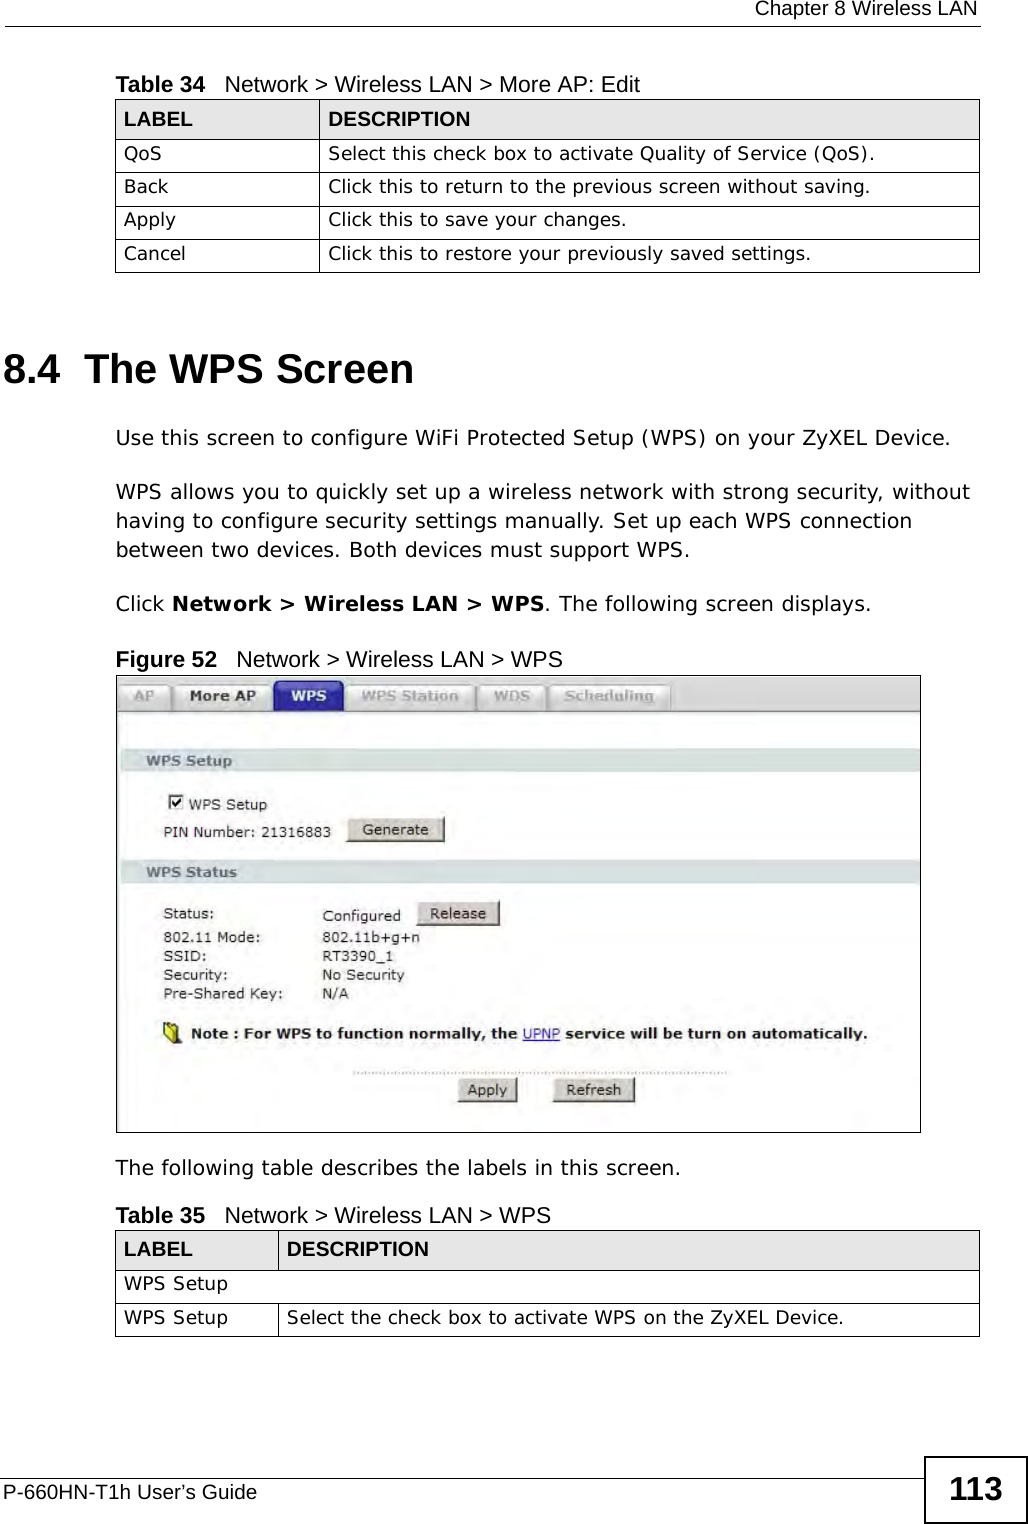  Chapter 8 Wireless LANP-660HN-T1h User’s Guide 1138.4  The WPS ScreenUse this screen to configure WiFi Protected Setup (WPS) on your ZyXEL Device.WPS allows you to quickly set up a wireless network with strong security, without having to configure security settings manually. Set up each WPS connection between two devices. Both devices must support WPS.Click Network &gt; Wireless LAN &gt; WPS. The following screen displays.Figure 52   Network &gt; Wireless LAN &gt; WPSThe following table describes the labels in this screen.QoS Select this check box to activate Quality of Service (QoS).Back Click this to return to the previous screen without saving.Apply Click this to save your changes.Cancel Click this to restore your previously saved settings.Table 34   Network &gt; Wireless LAN &gt; More AP: EditLABEL DESCRIPTIONTable 35   Network &gt; Wireless LAN &gt; WPSLABEL DESCRIPTIONWPS SetupWPS Setup Select the check box to activate WPS on the ZyXEL Device.